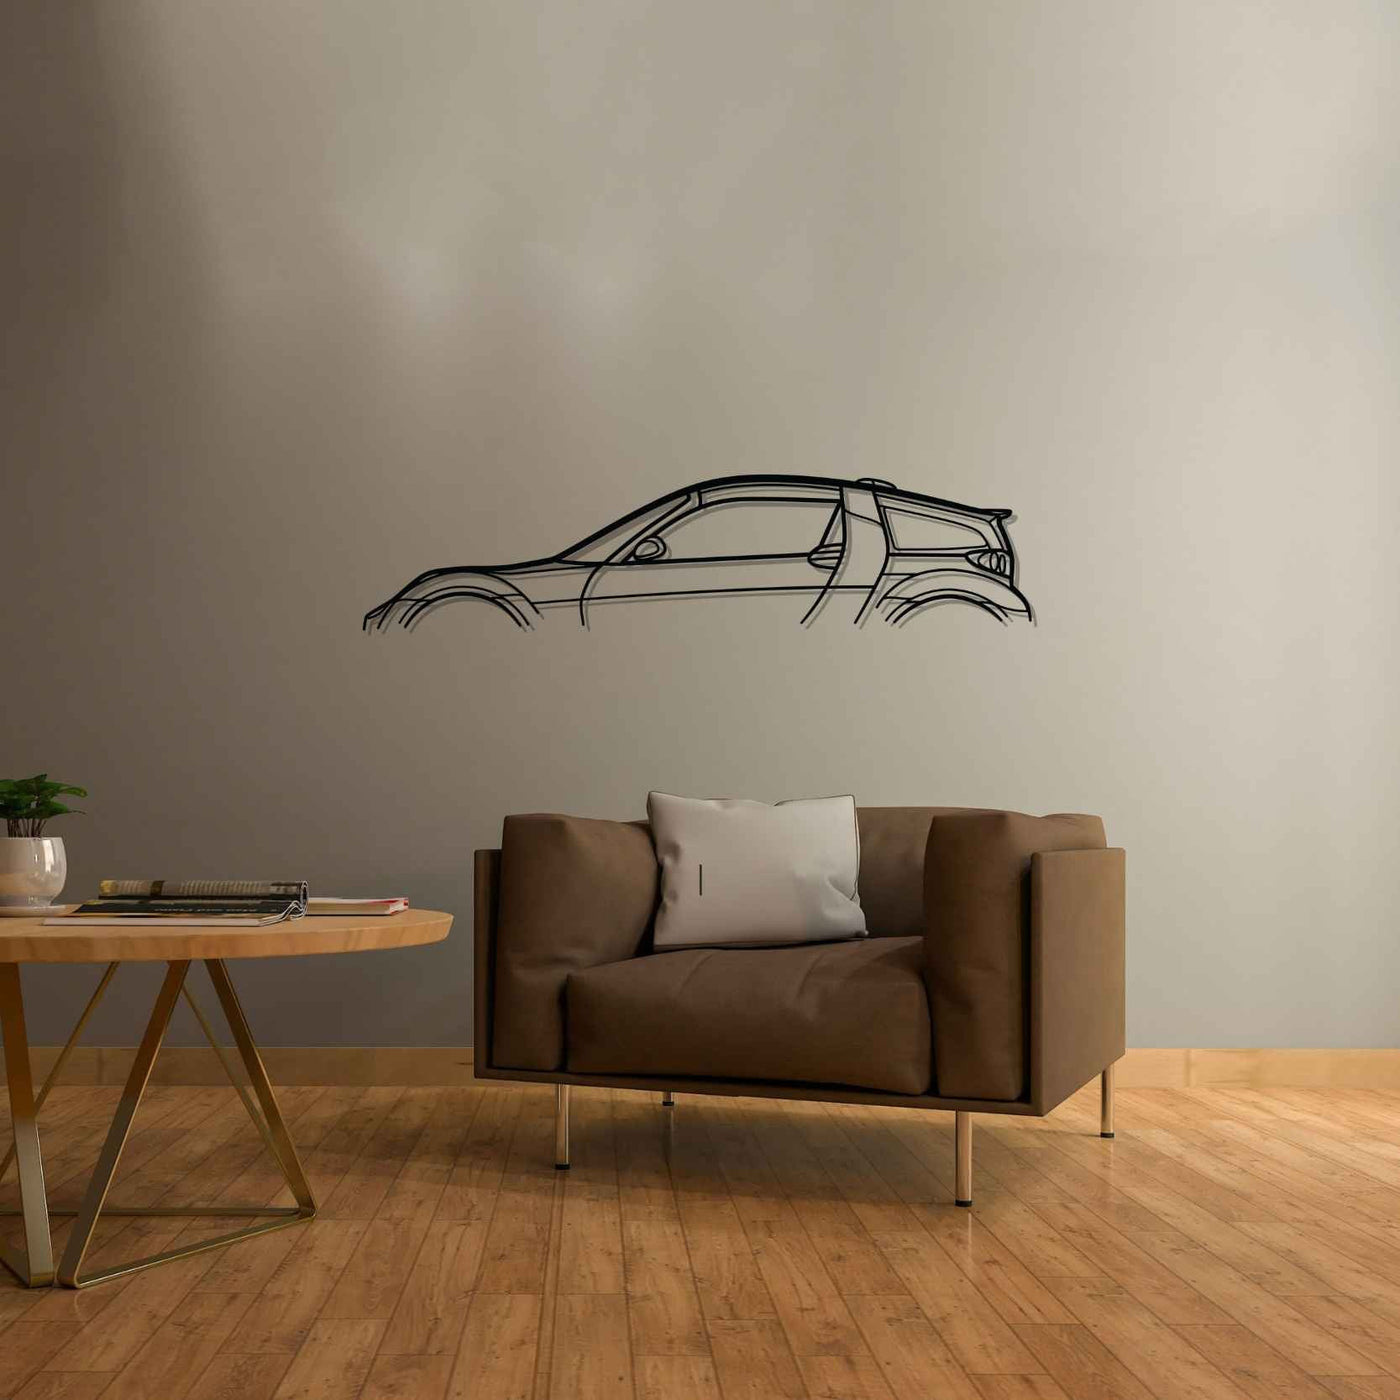 Smart coupe B edition 2002 Classic Silhouette Metal Wall Art